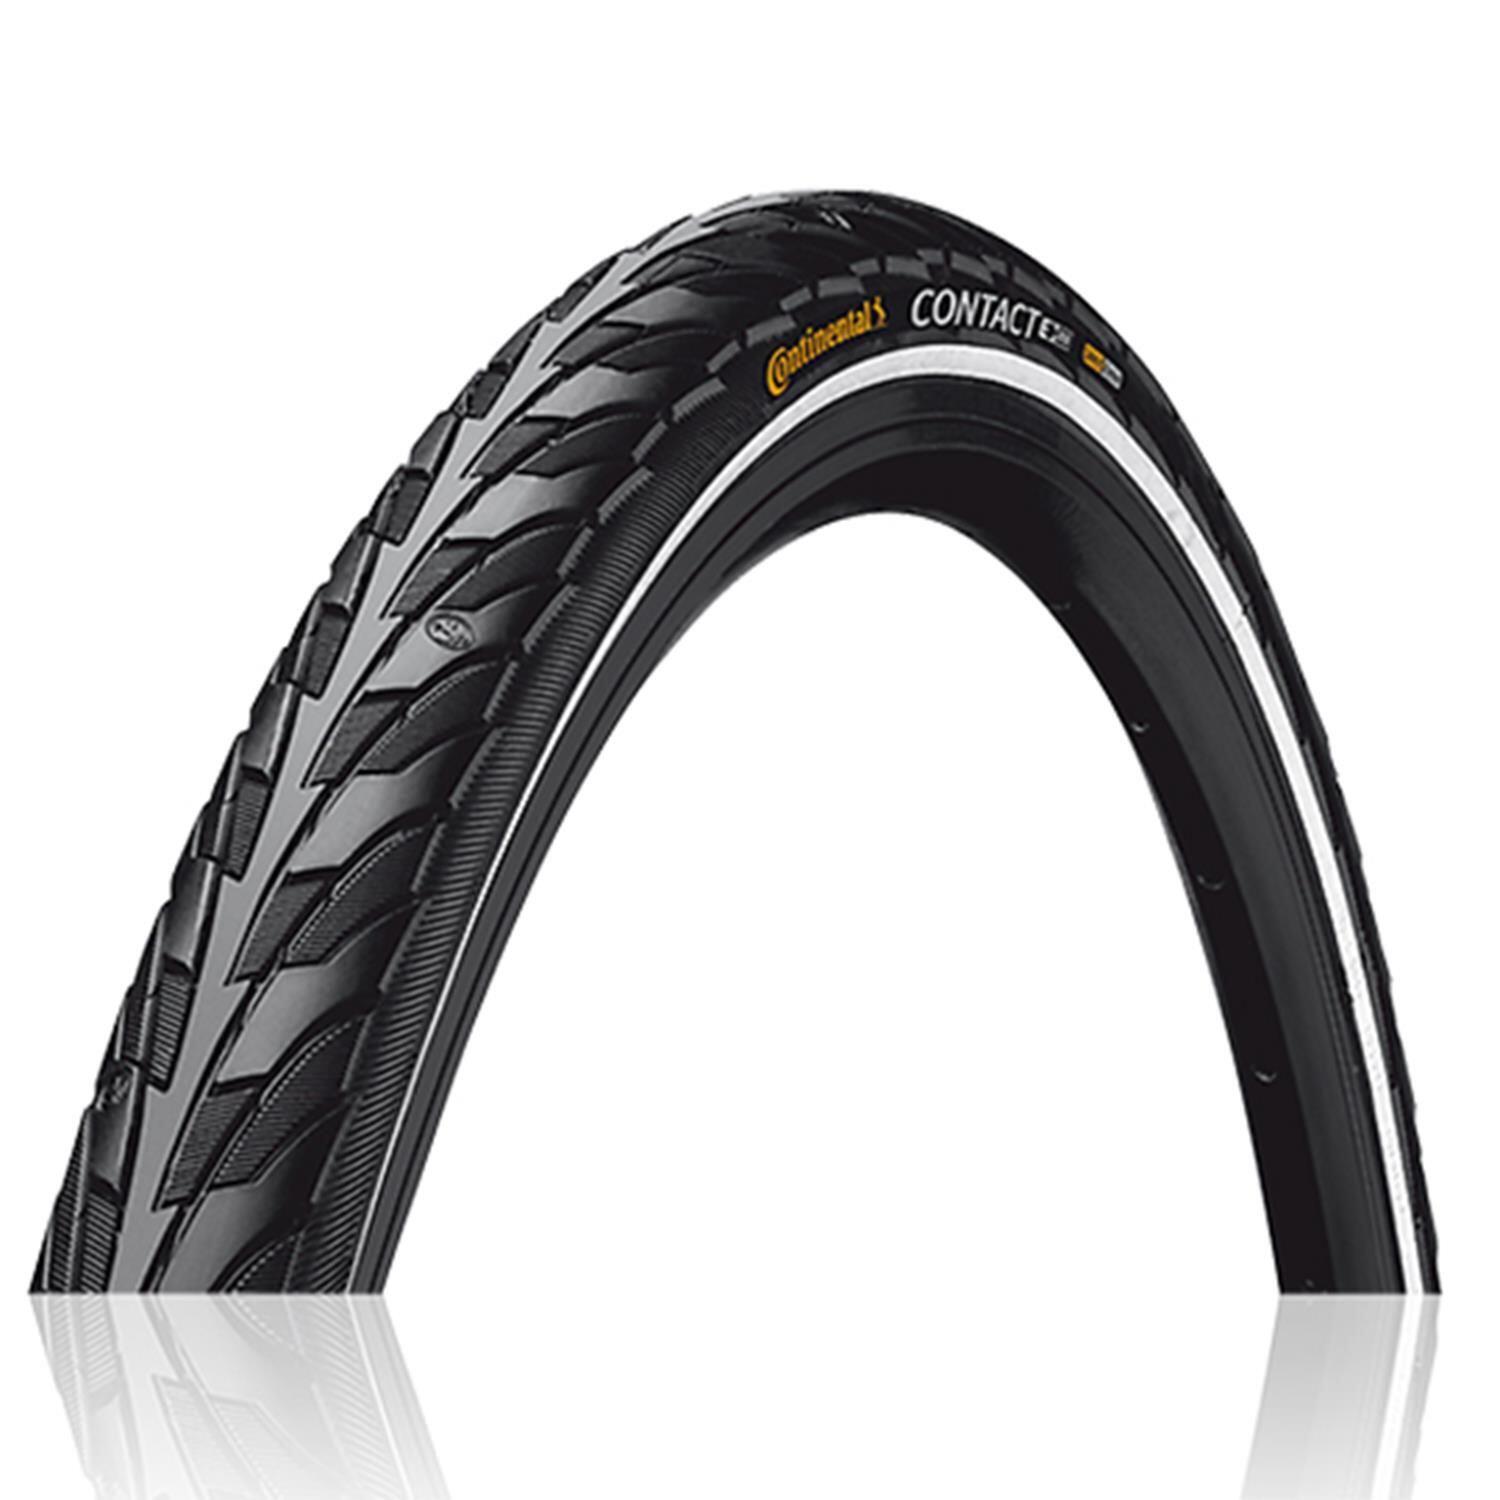 CONTINENTAL CONTACT Tyre-Wire Bead Urban Black/Black 700 X 42C Puncture Protection